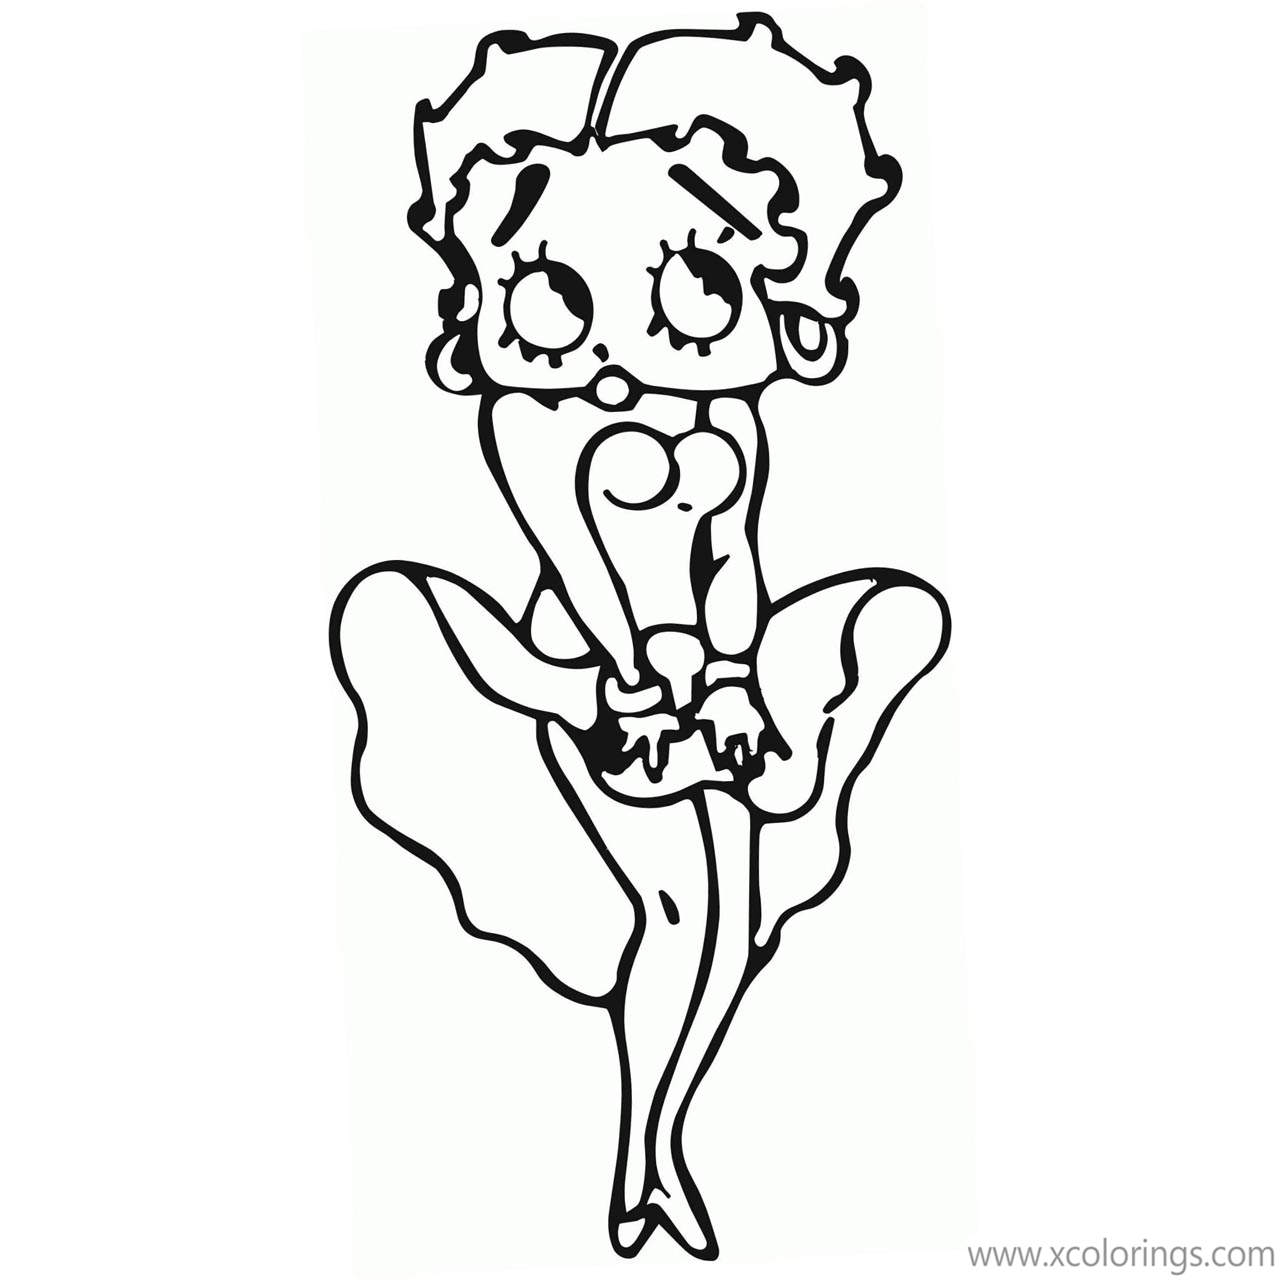 Free Betty Boop Coloring Pages Marilyn Monroe printable